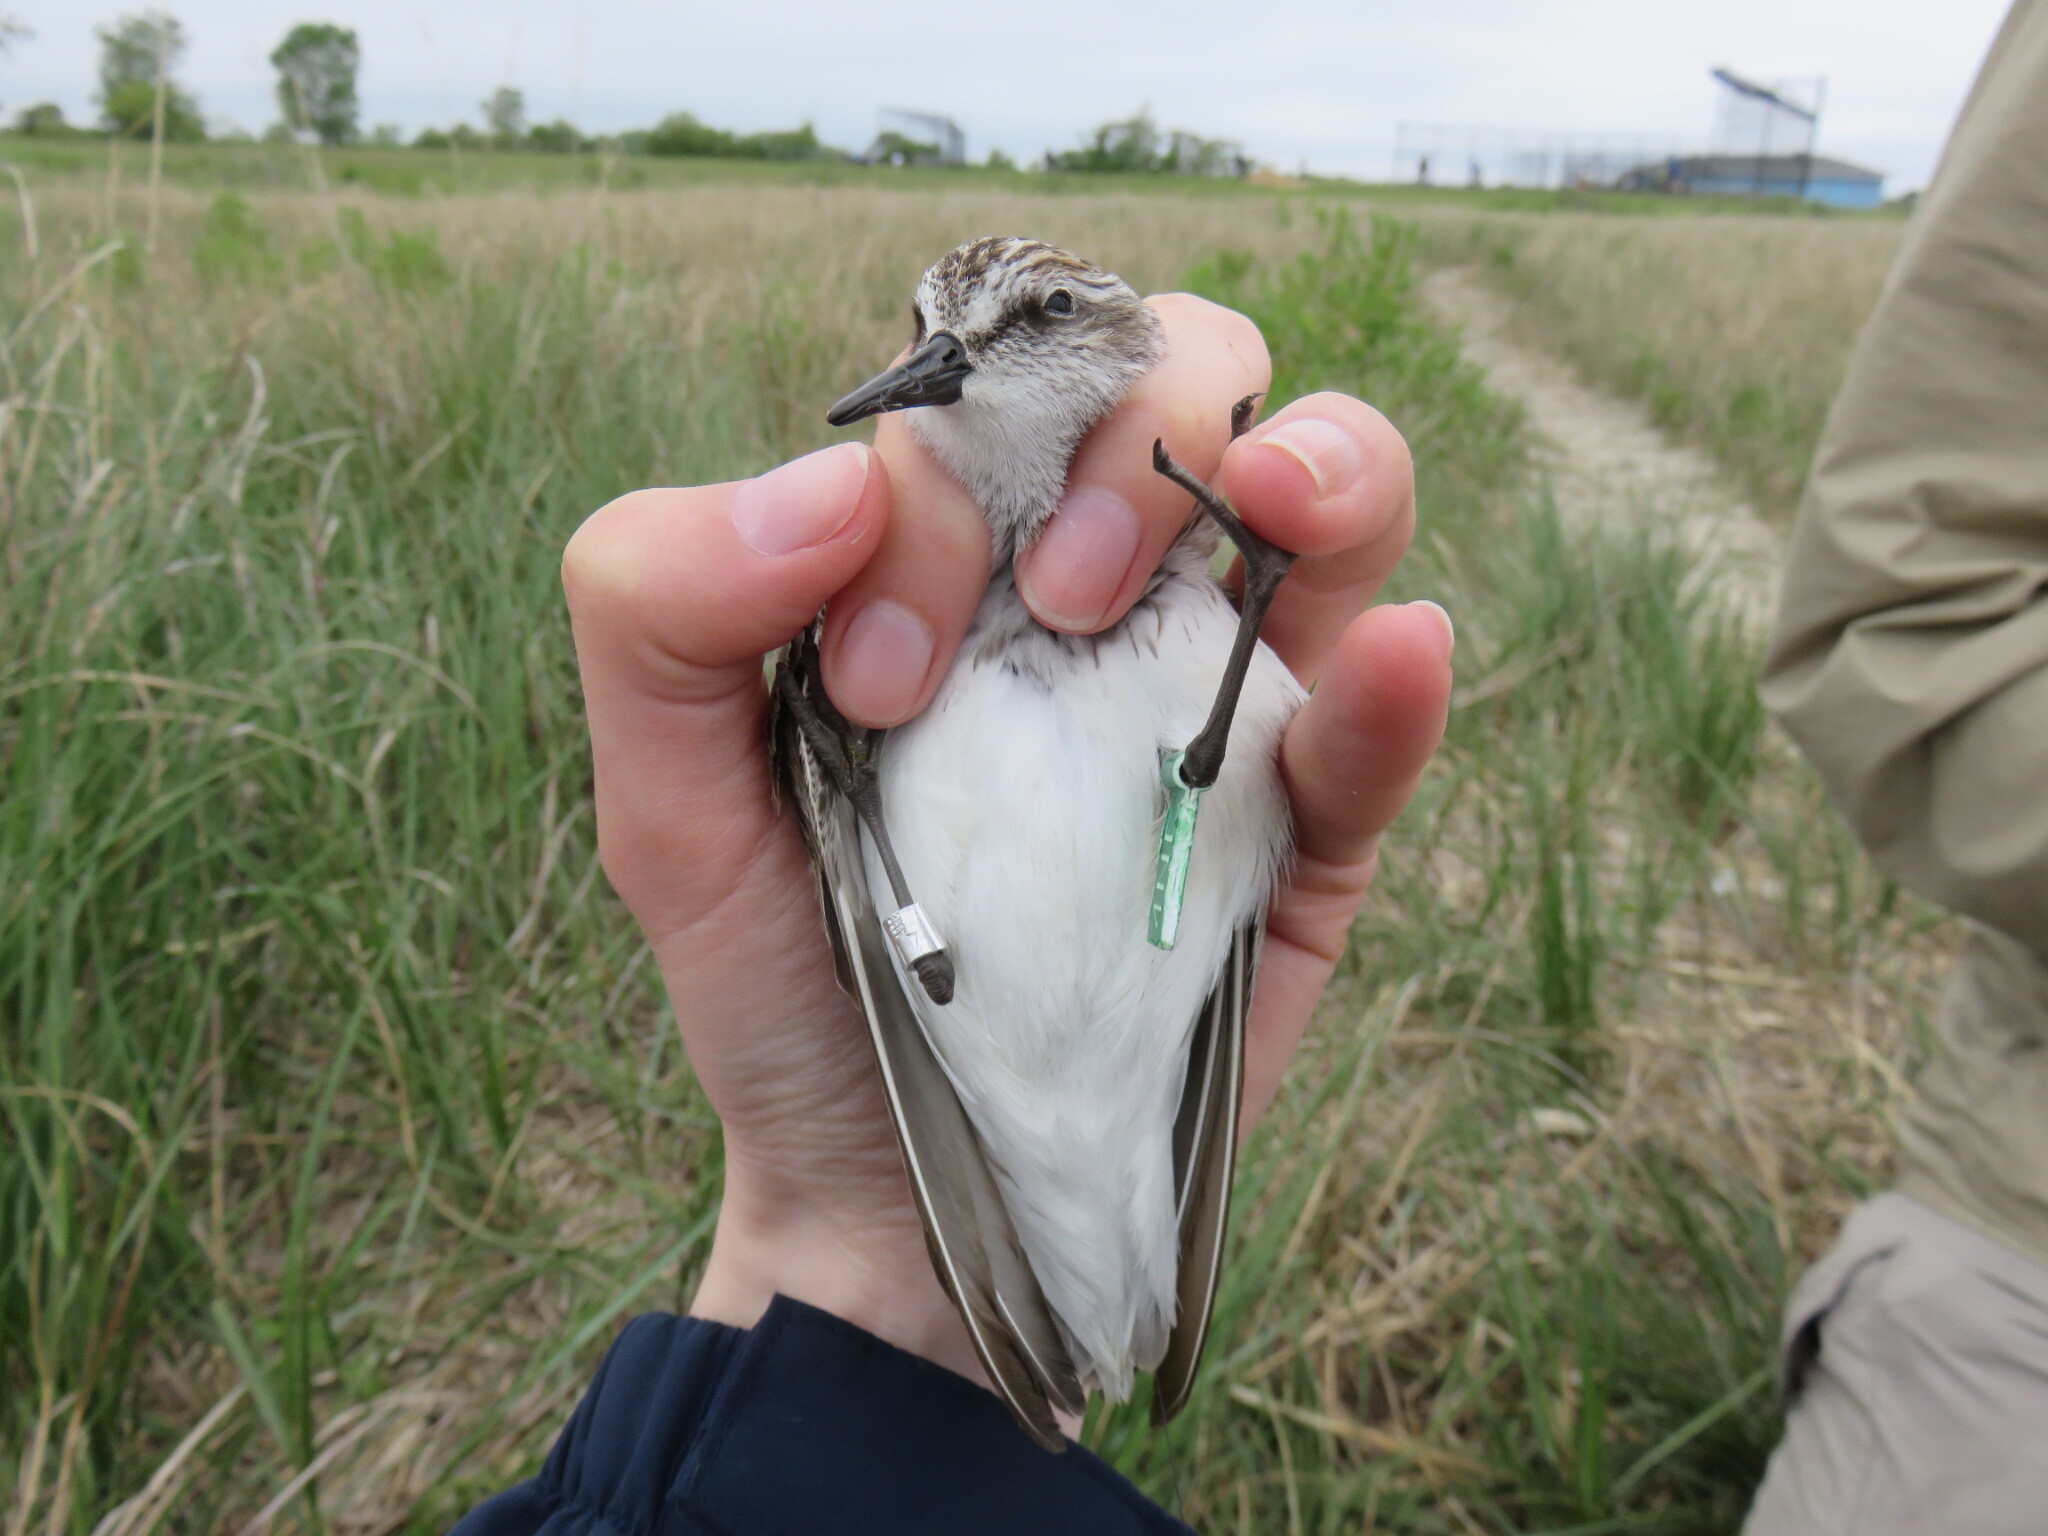 A Semipalmated Sandpiper is fitted with light-weight tags that will allow tracking of its movements during both migration and the breeding season. Photo: NYC Bird Alliance